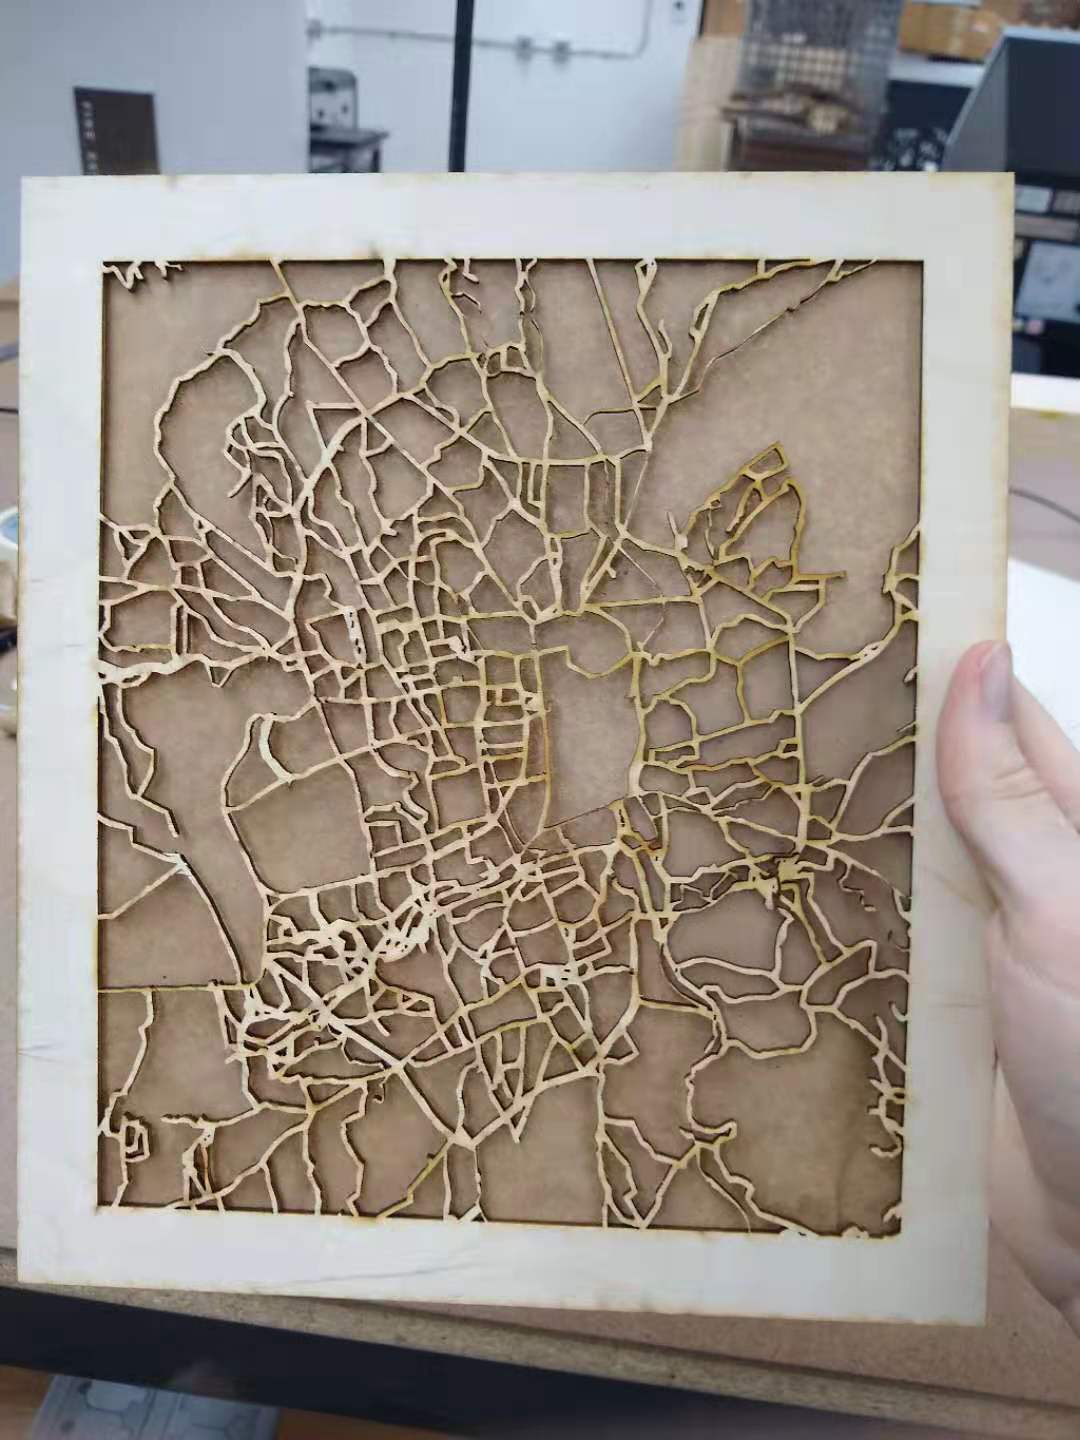 A laser-cut city map with paper taped to the back.